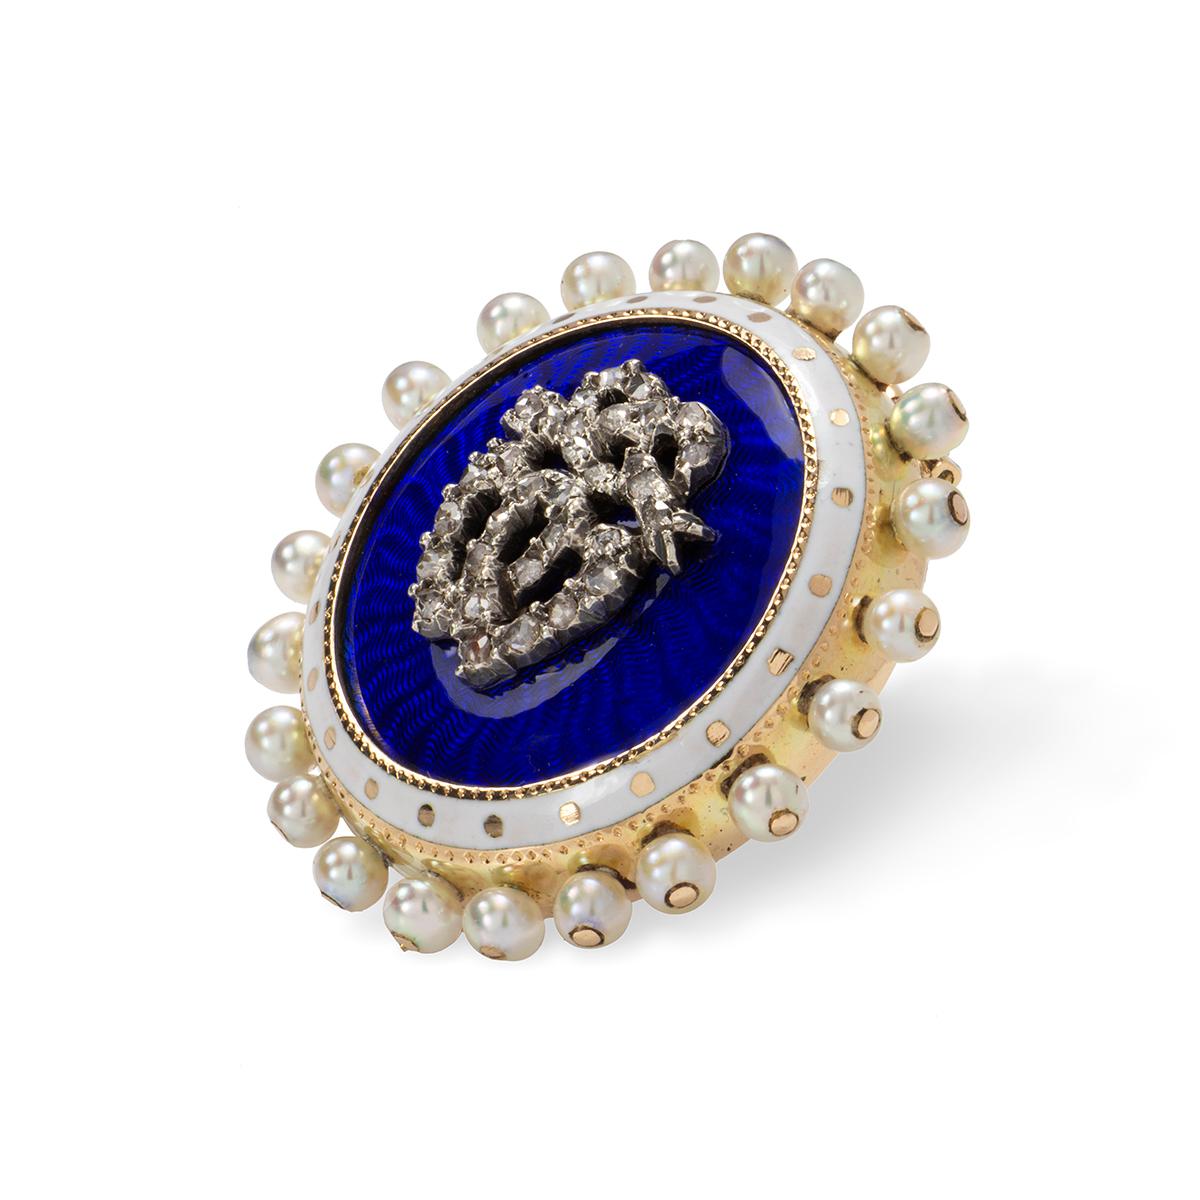 A Victorian enamel, pearl and diamond brooch, the central silver entwined double heart and ribbon bow motif encrusted with rose-cut diamonds, to a cobalt blue guilloché enamel round shaped panel with white enamel and pearl border, all set to a